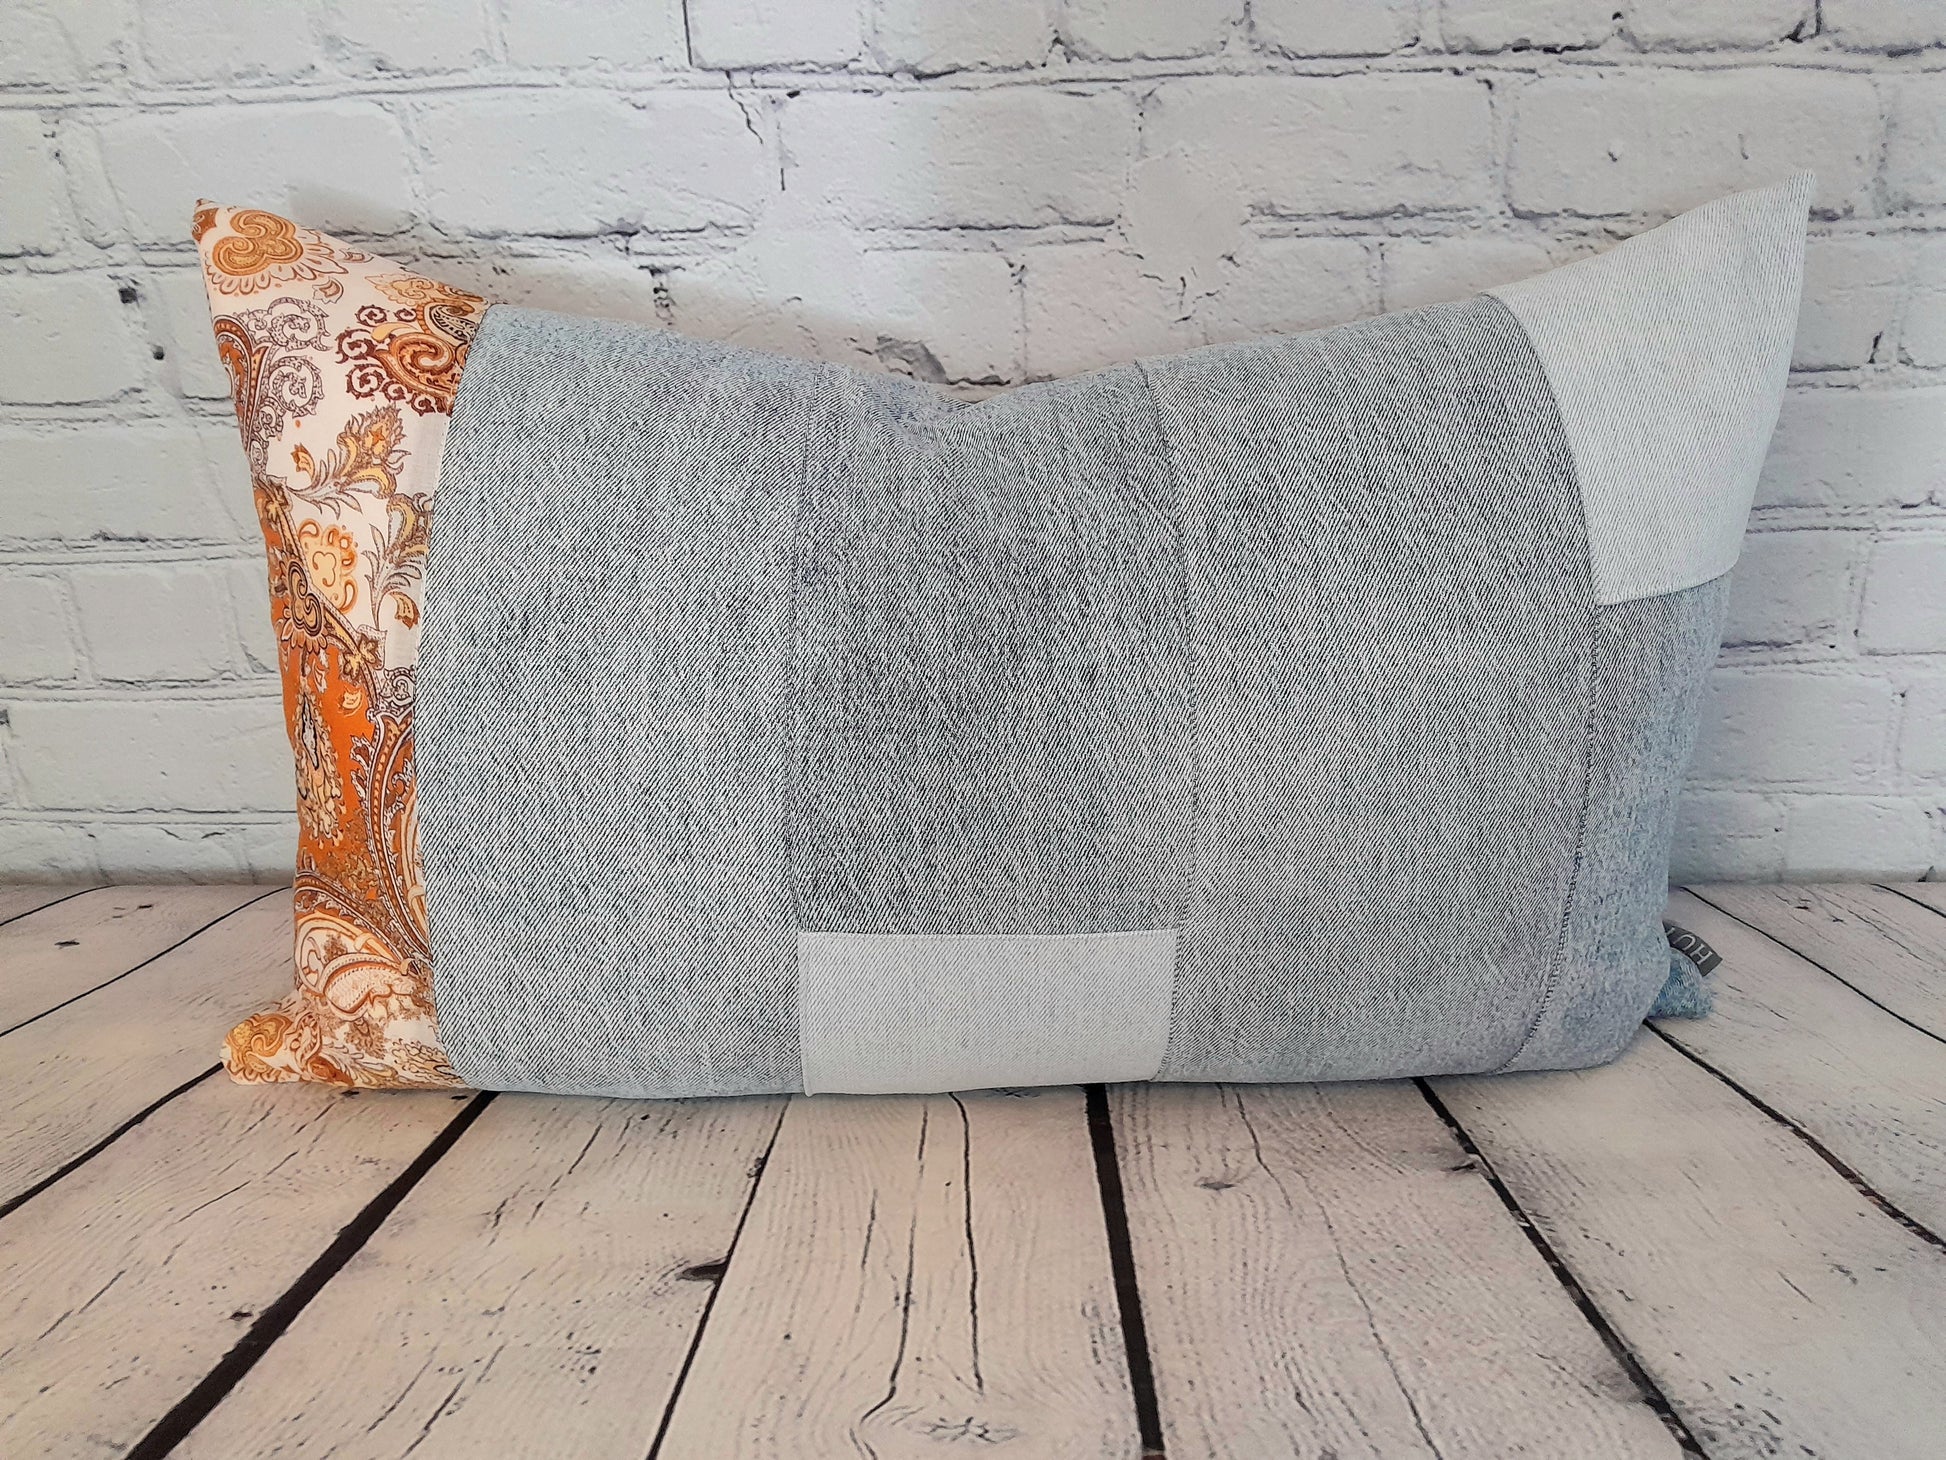 recycled denim jeans and vintage fabric luxury cushion covers throw pillows